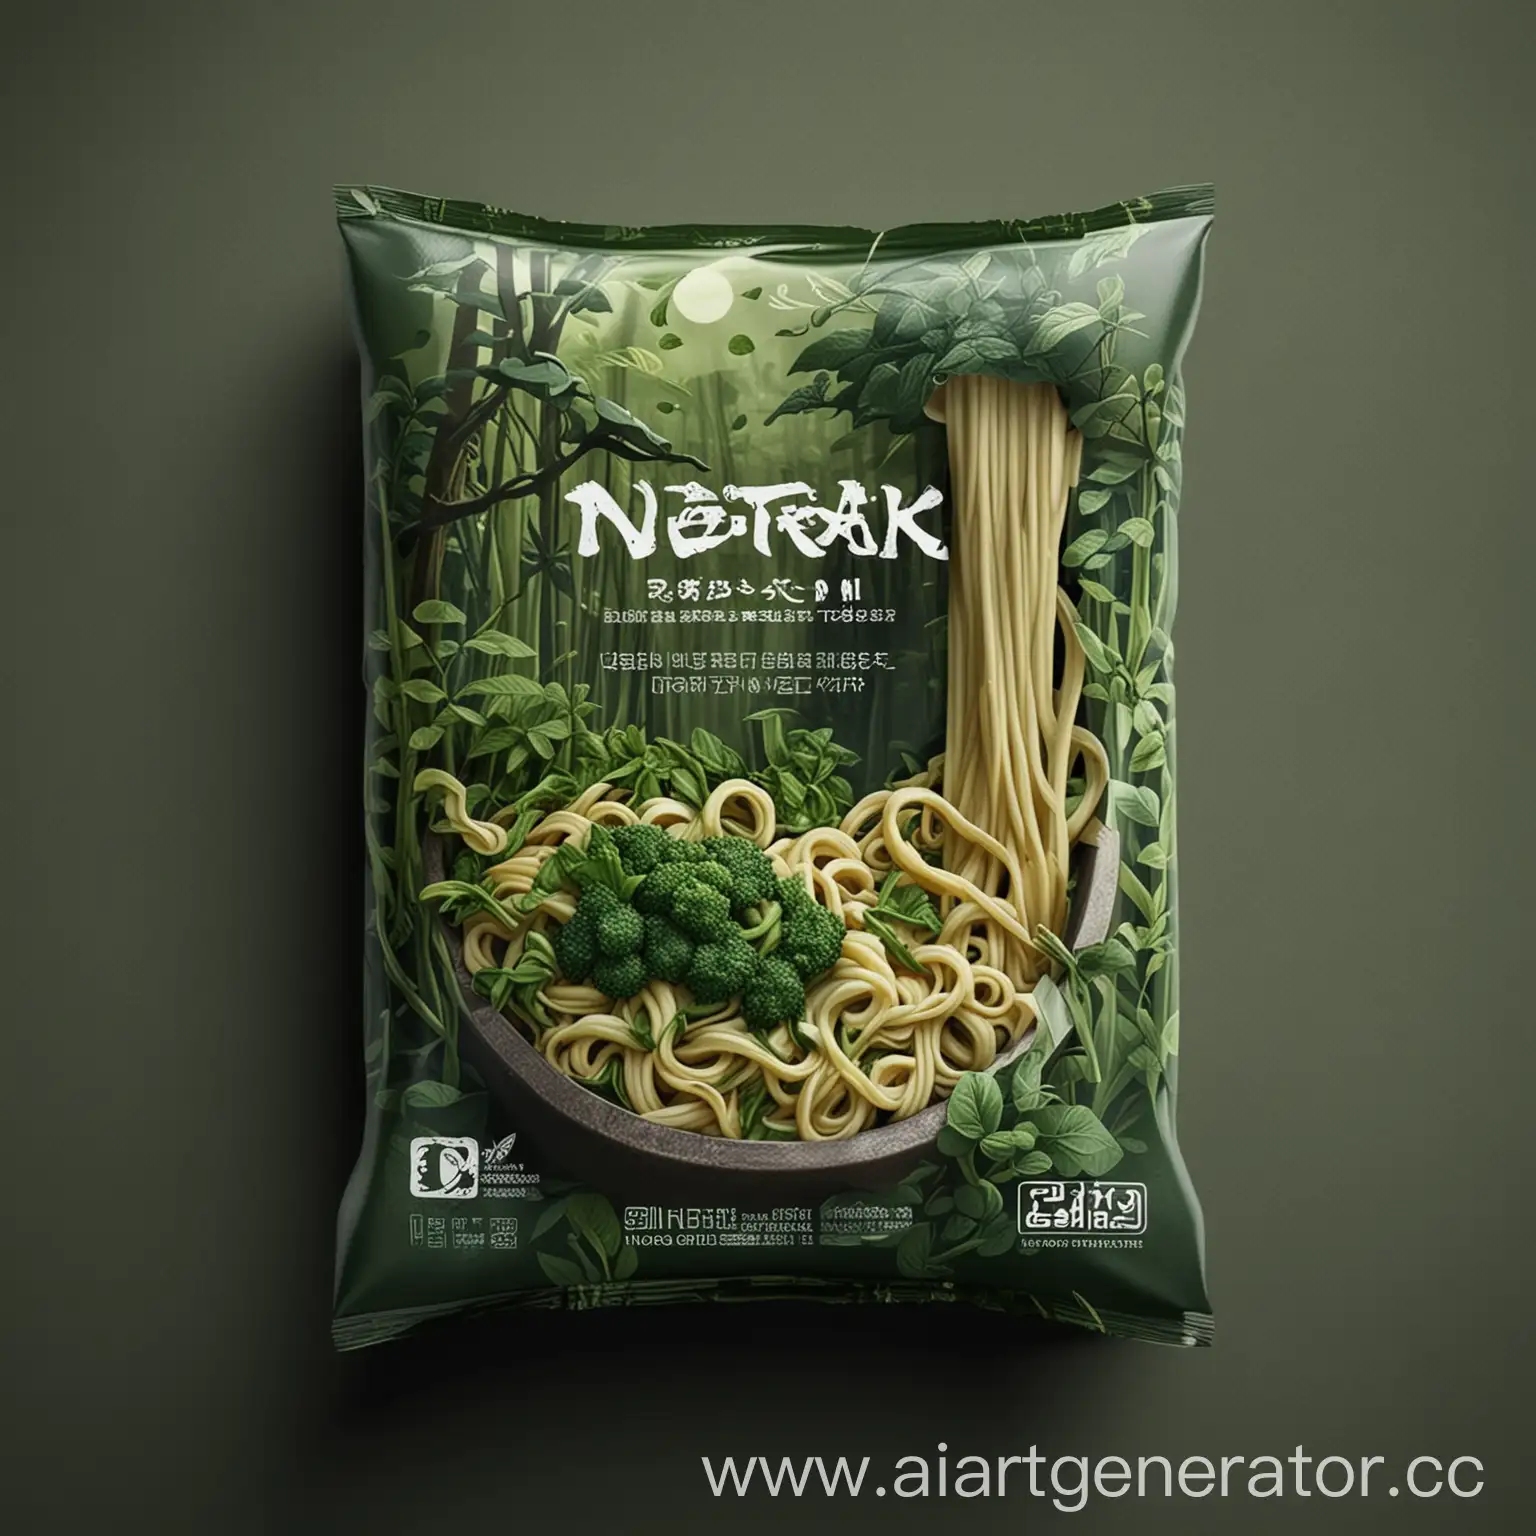 Forest-Noodles-Dota-2-Themed-Noodles-with-Green-Packaging-Design